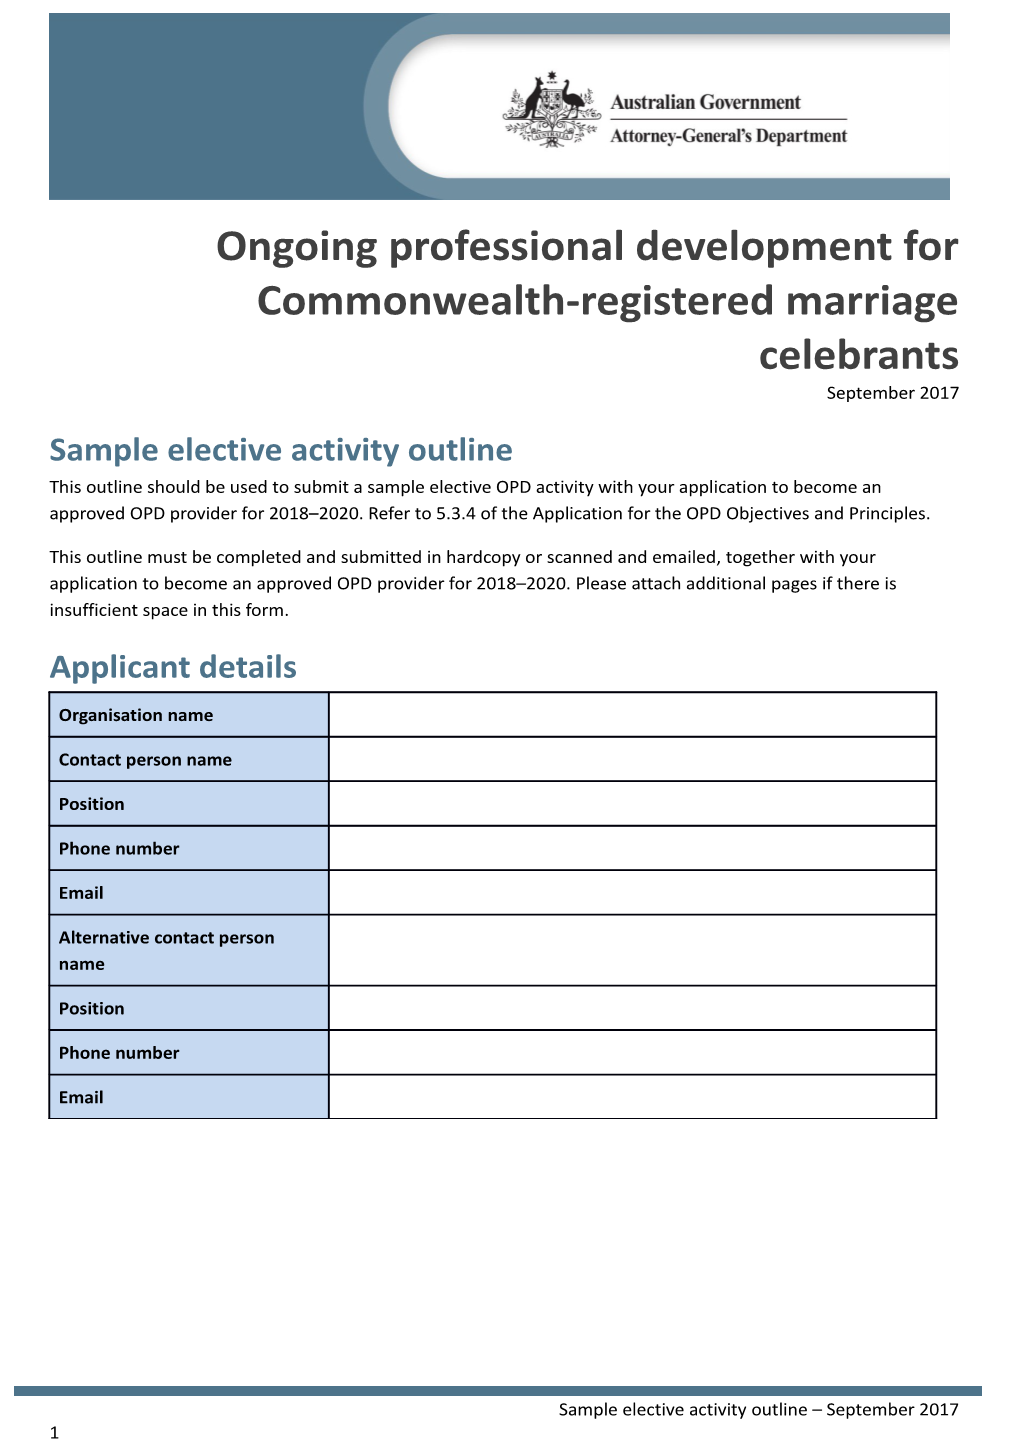 Sample Elective Activity Outline